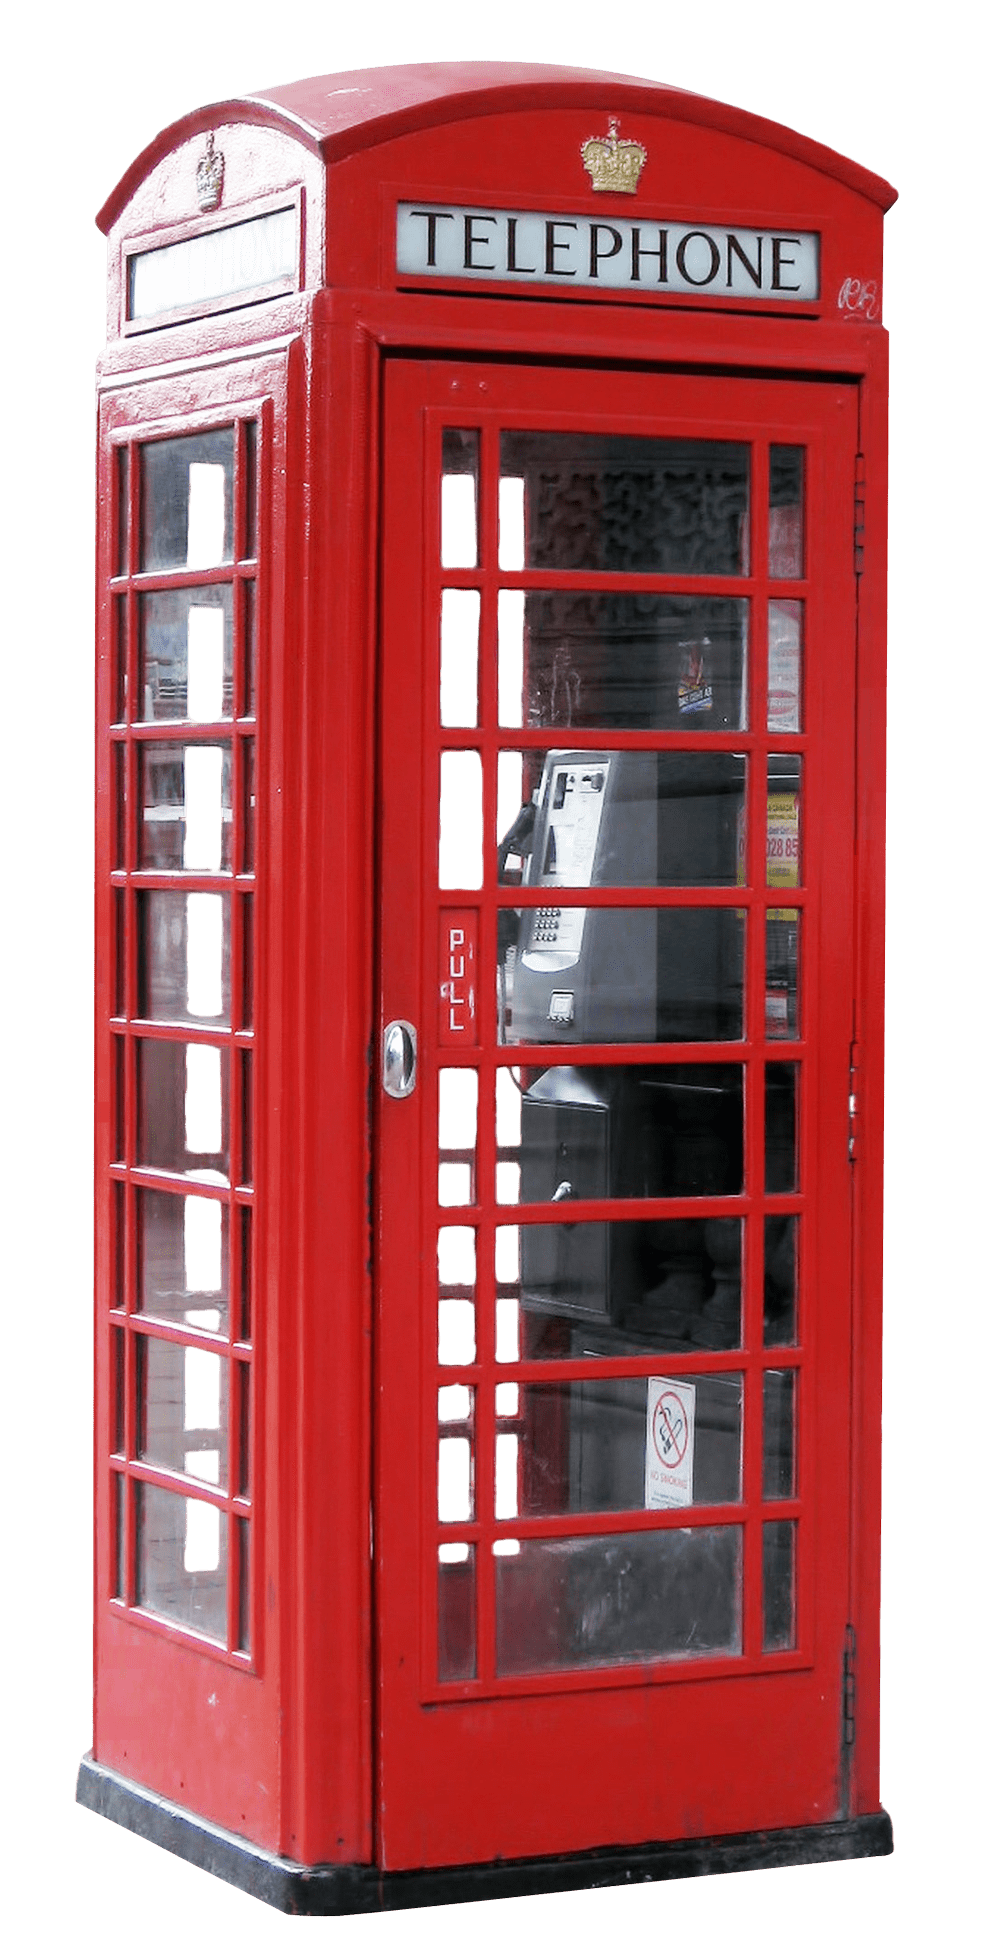 Booth side view transparent. Telephone clipart red telephone